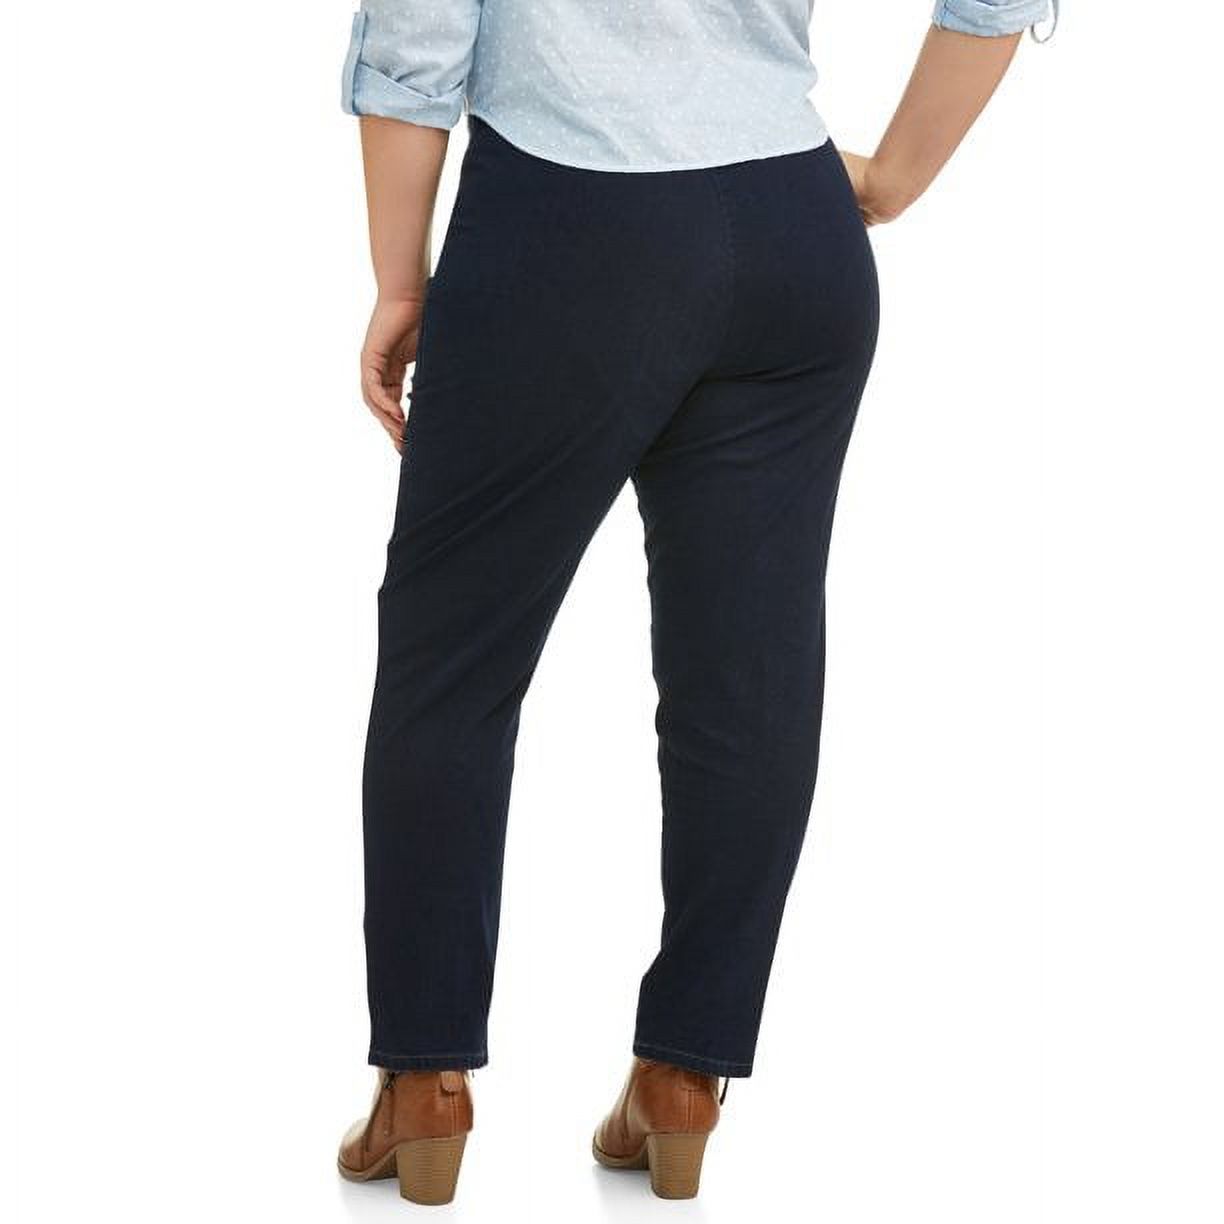 Just My Size Women's Plus 2 Pocket Pull-On Pant - image 3 of 7